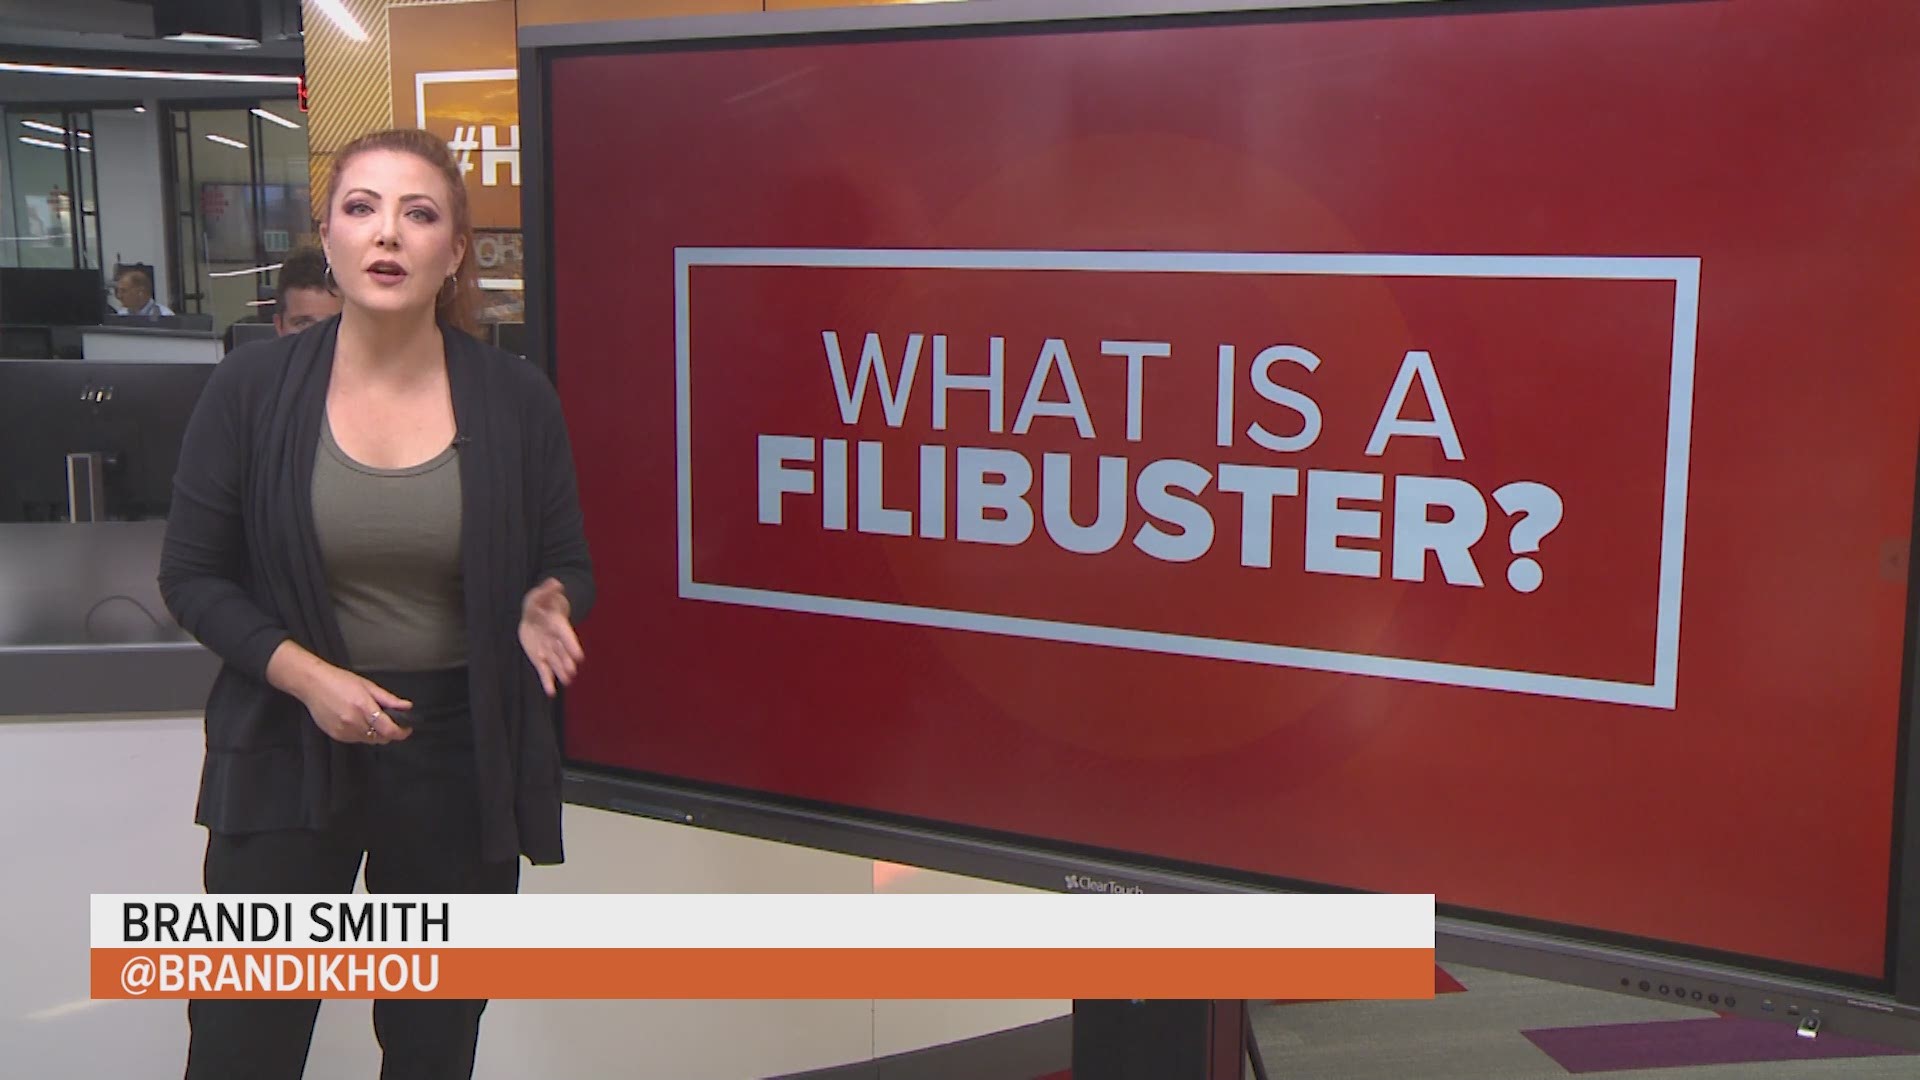 With all the talk of filibuster reform, we break down the filibuster rules and why Democrats are pushing for change.